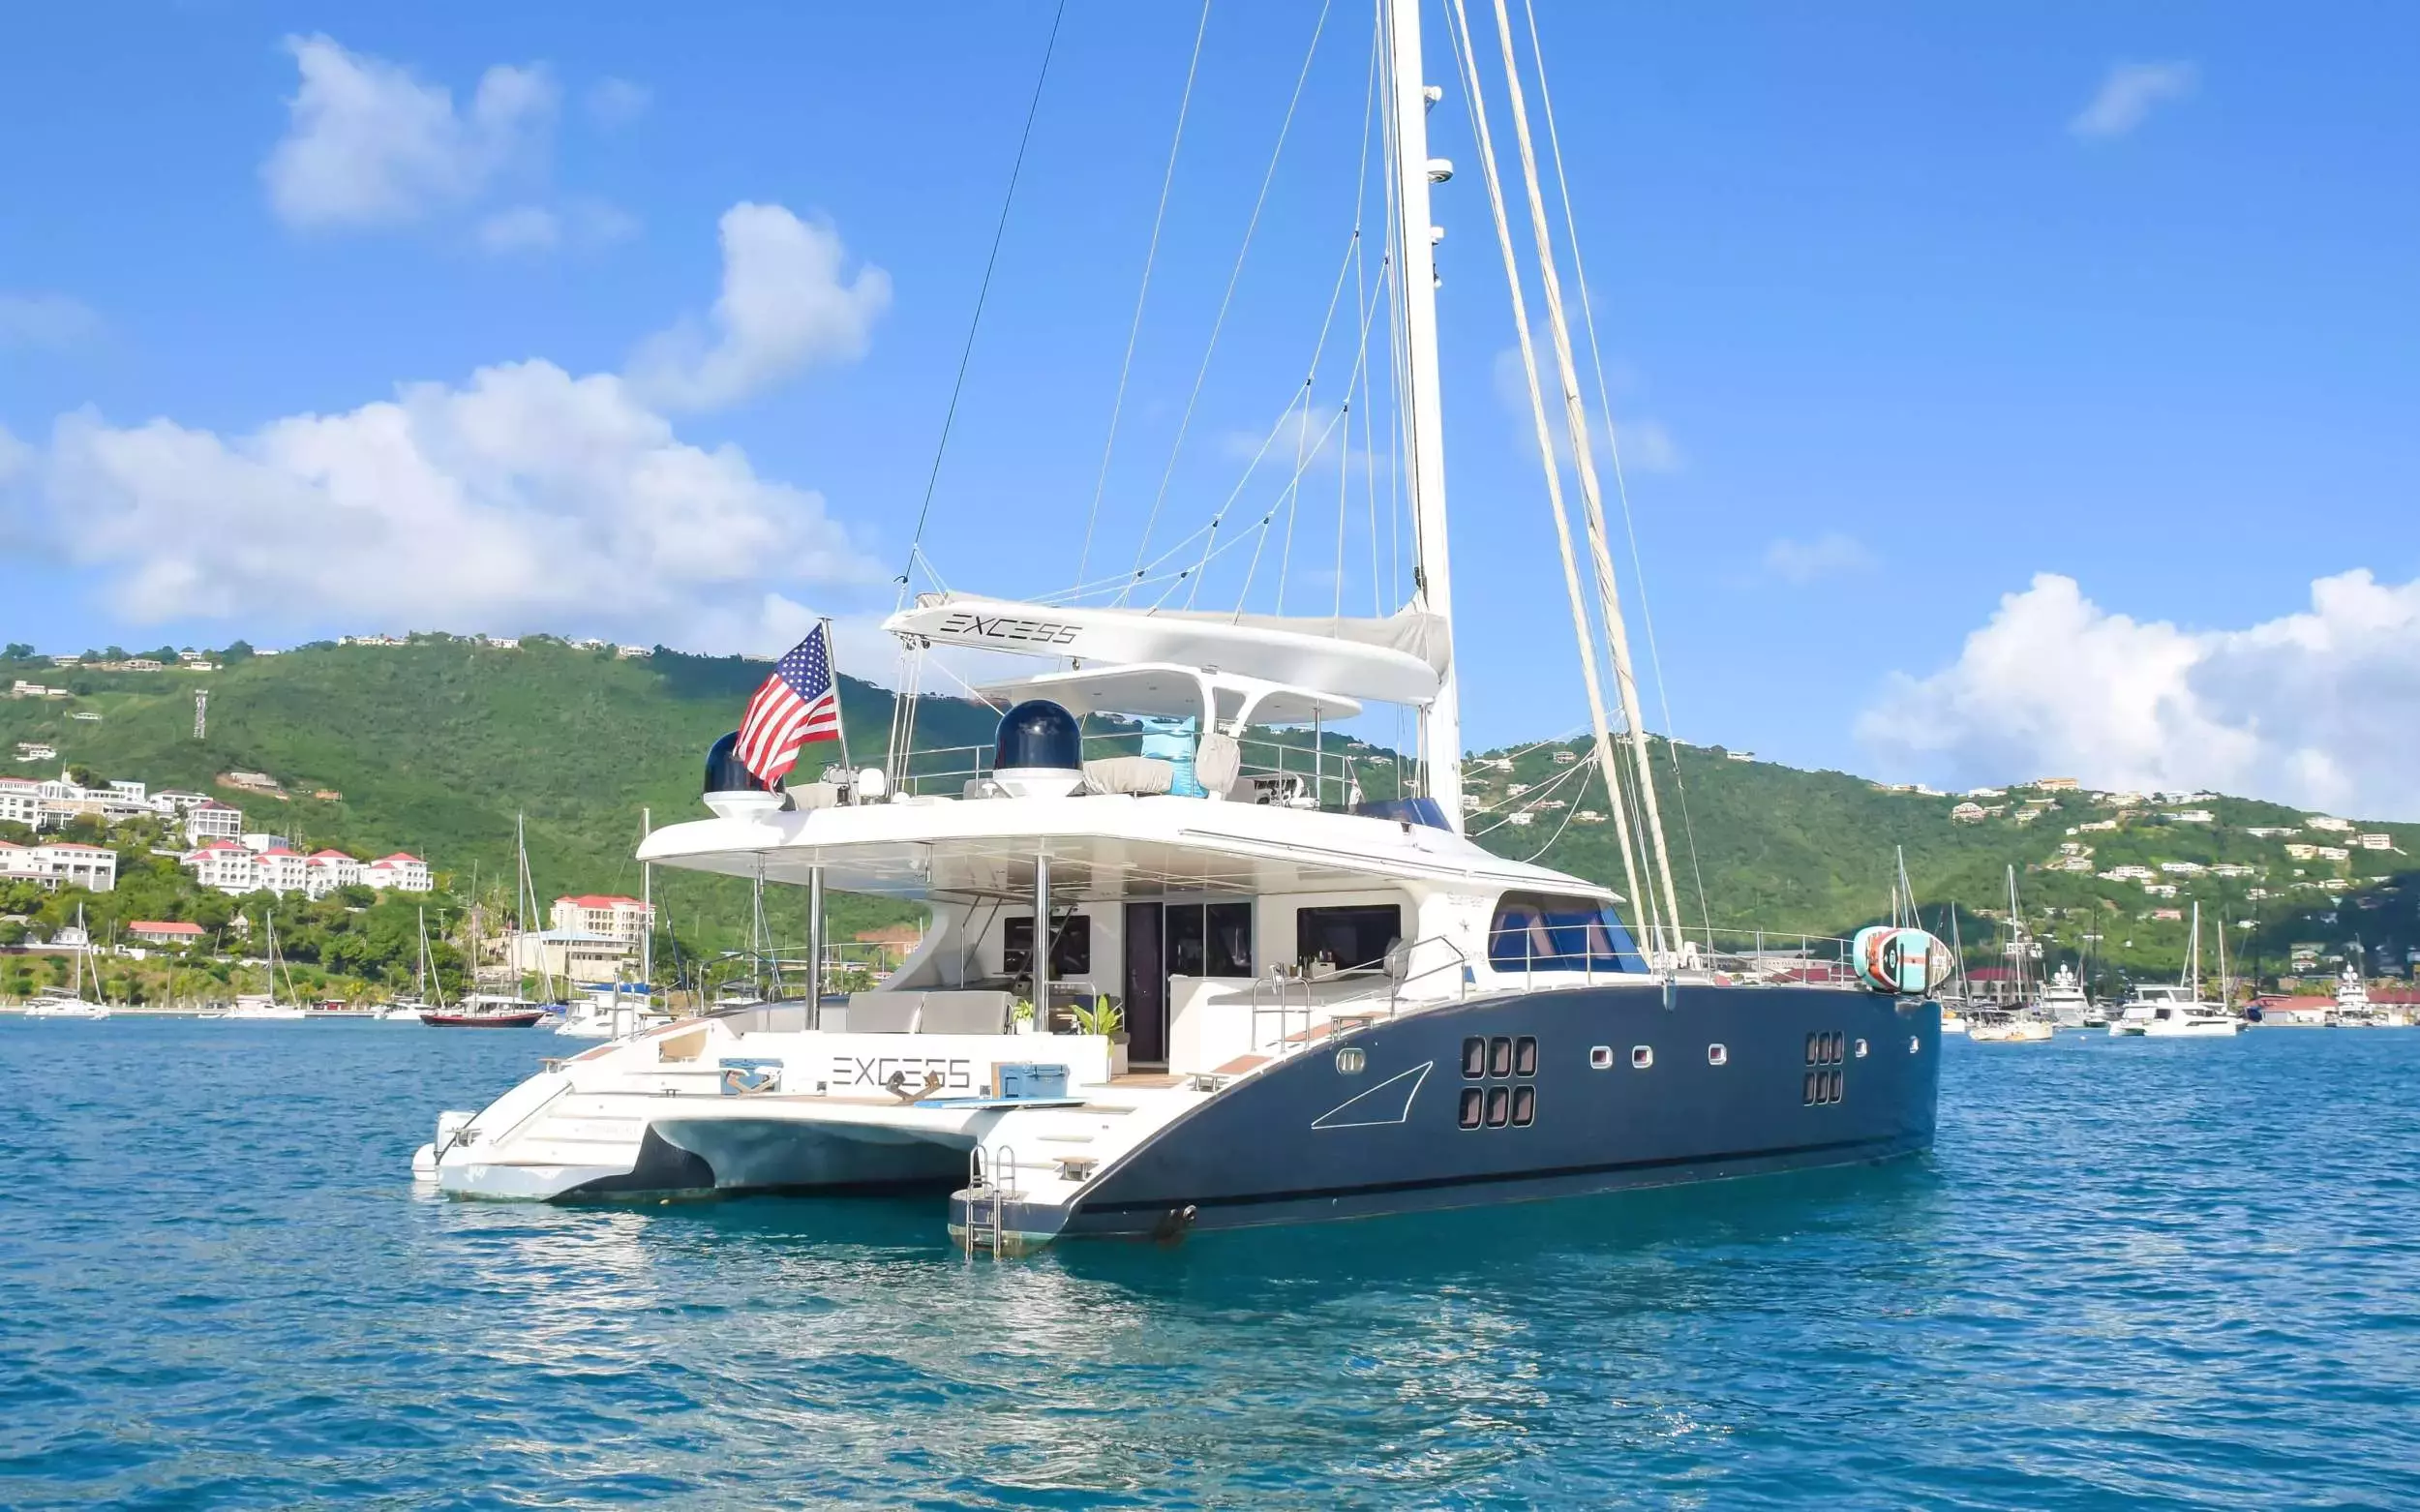 Excess by Sunreef Yachts - Special Offer for a private Luxury Catamaran Charter in Fajardo with a crew